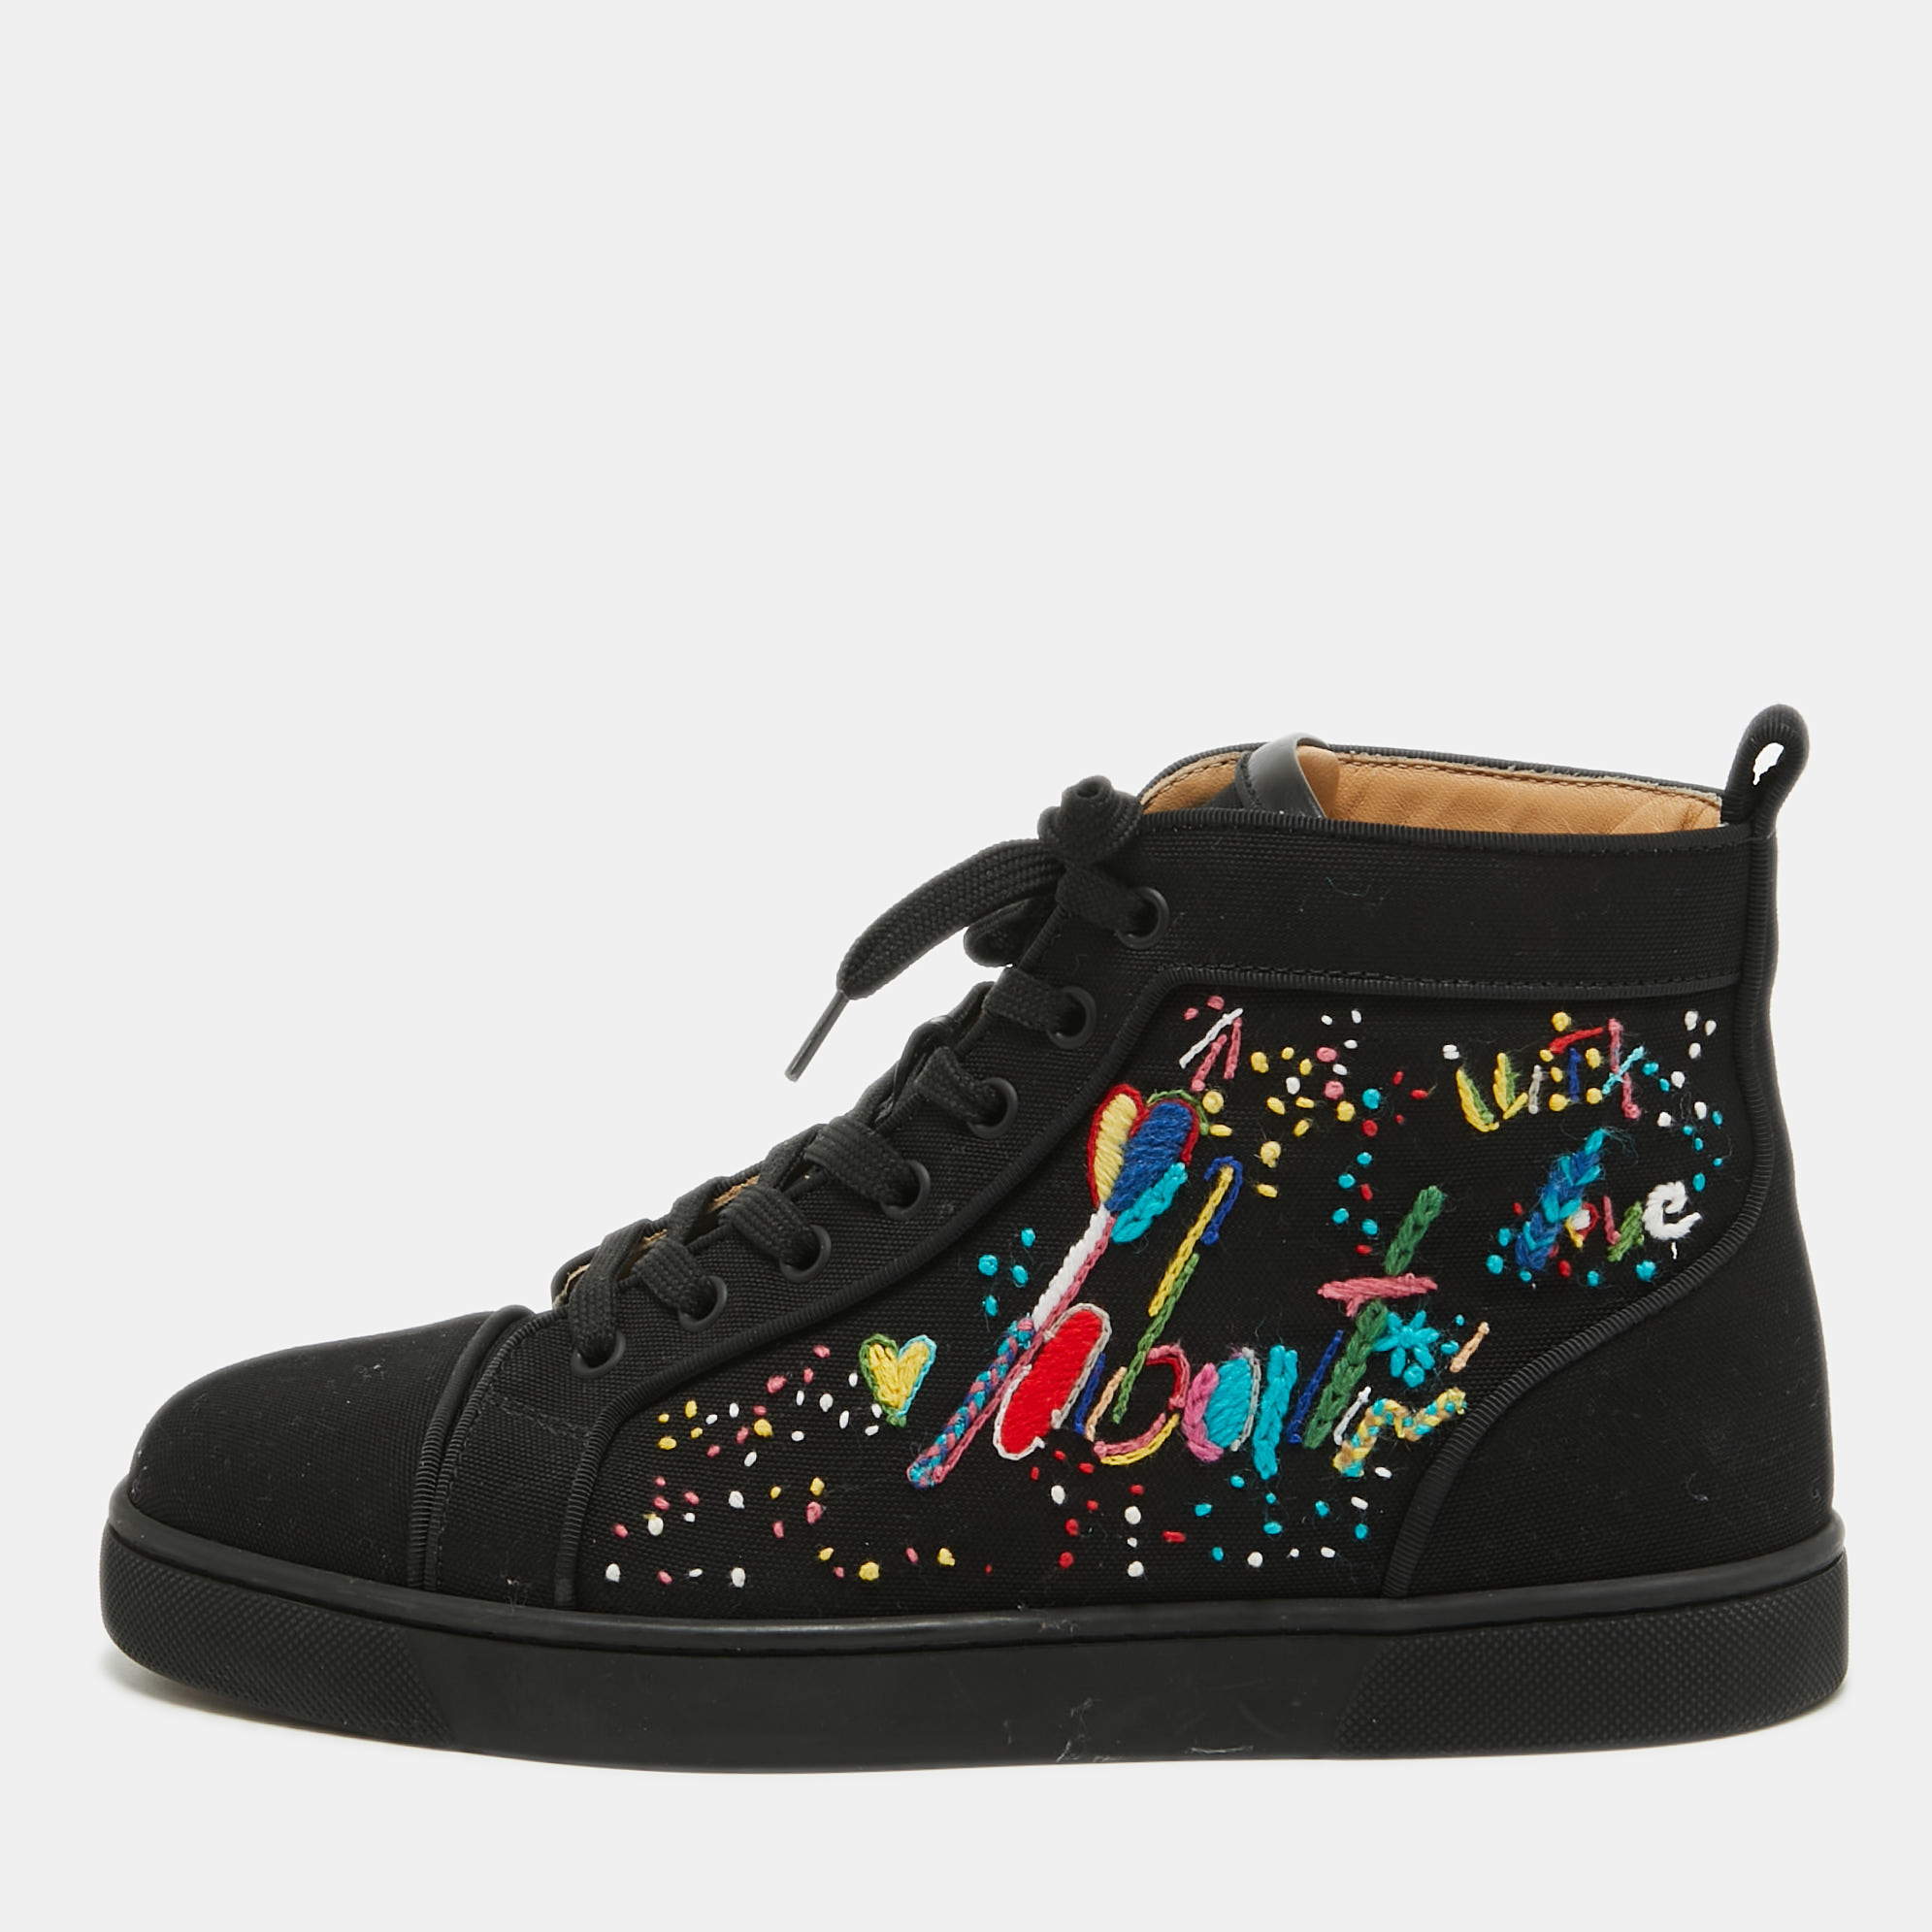 Pre-owned Christian Louboutin Black Canvas Embroidered Louis Orlato Sneakers Size 40